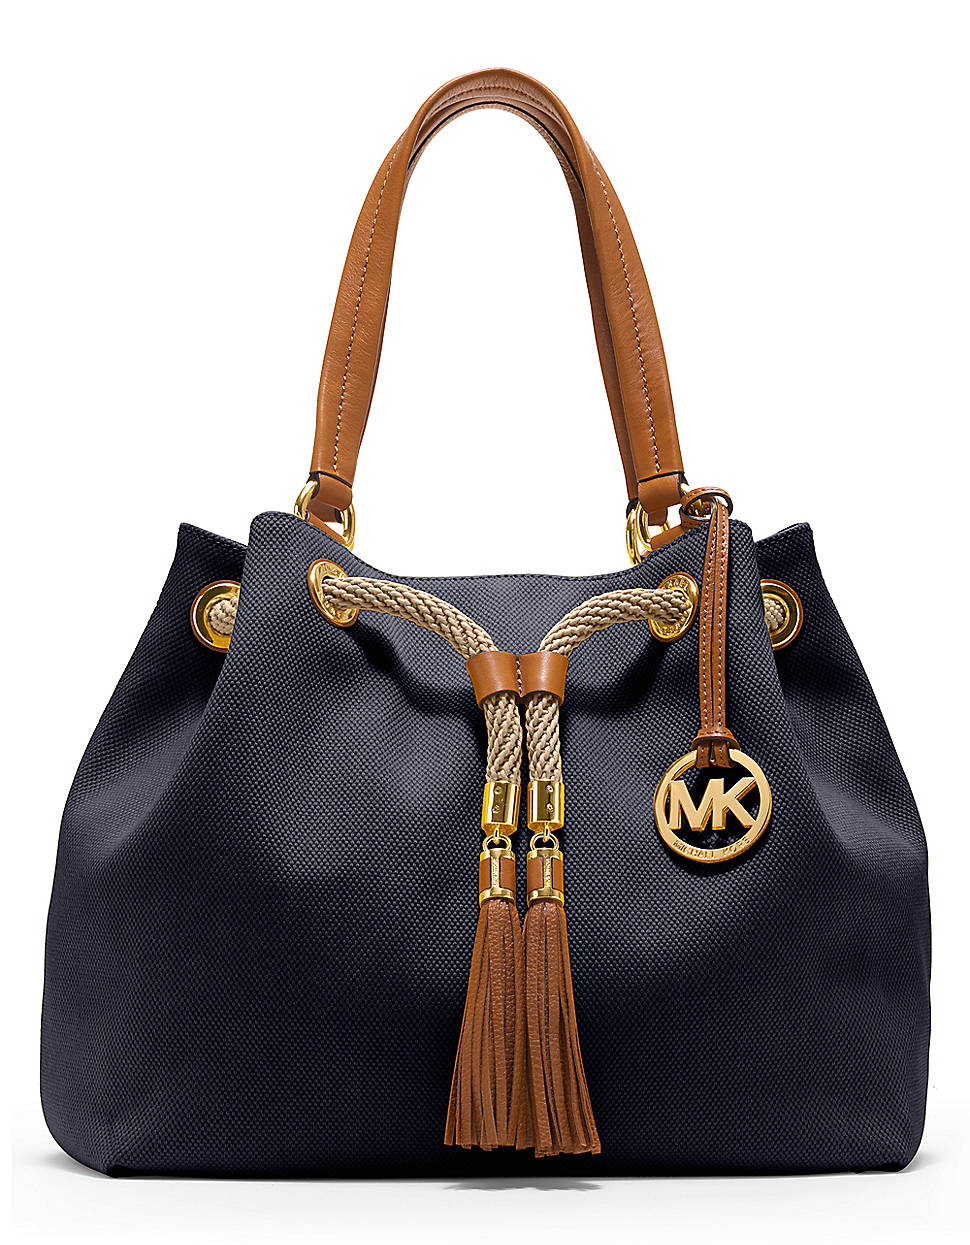 MICHAEL Michael Kors Canvas Gathered Tote in Blue - Lyst